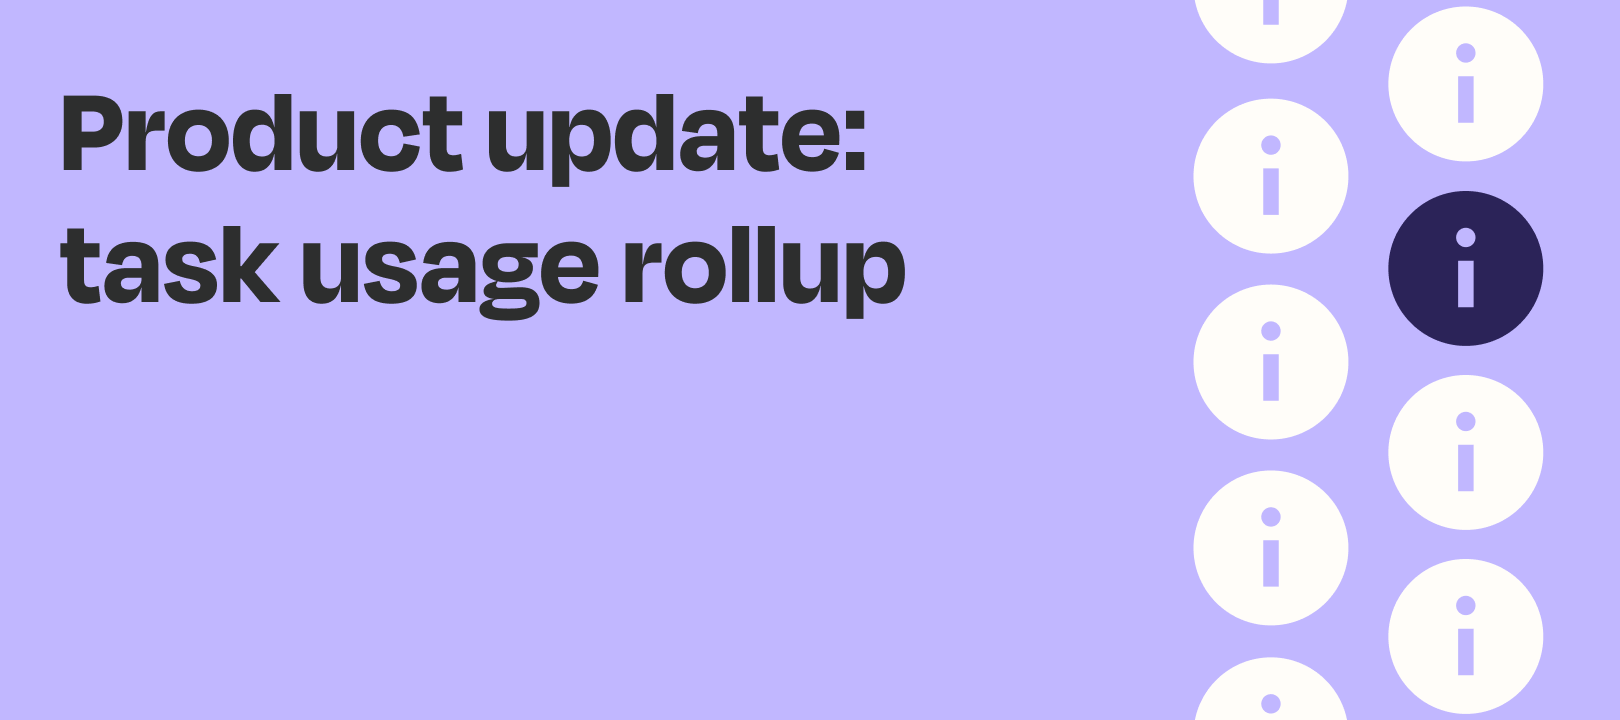 New Task Usage Rollup